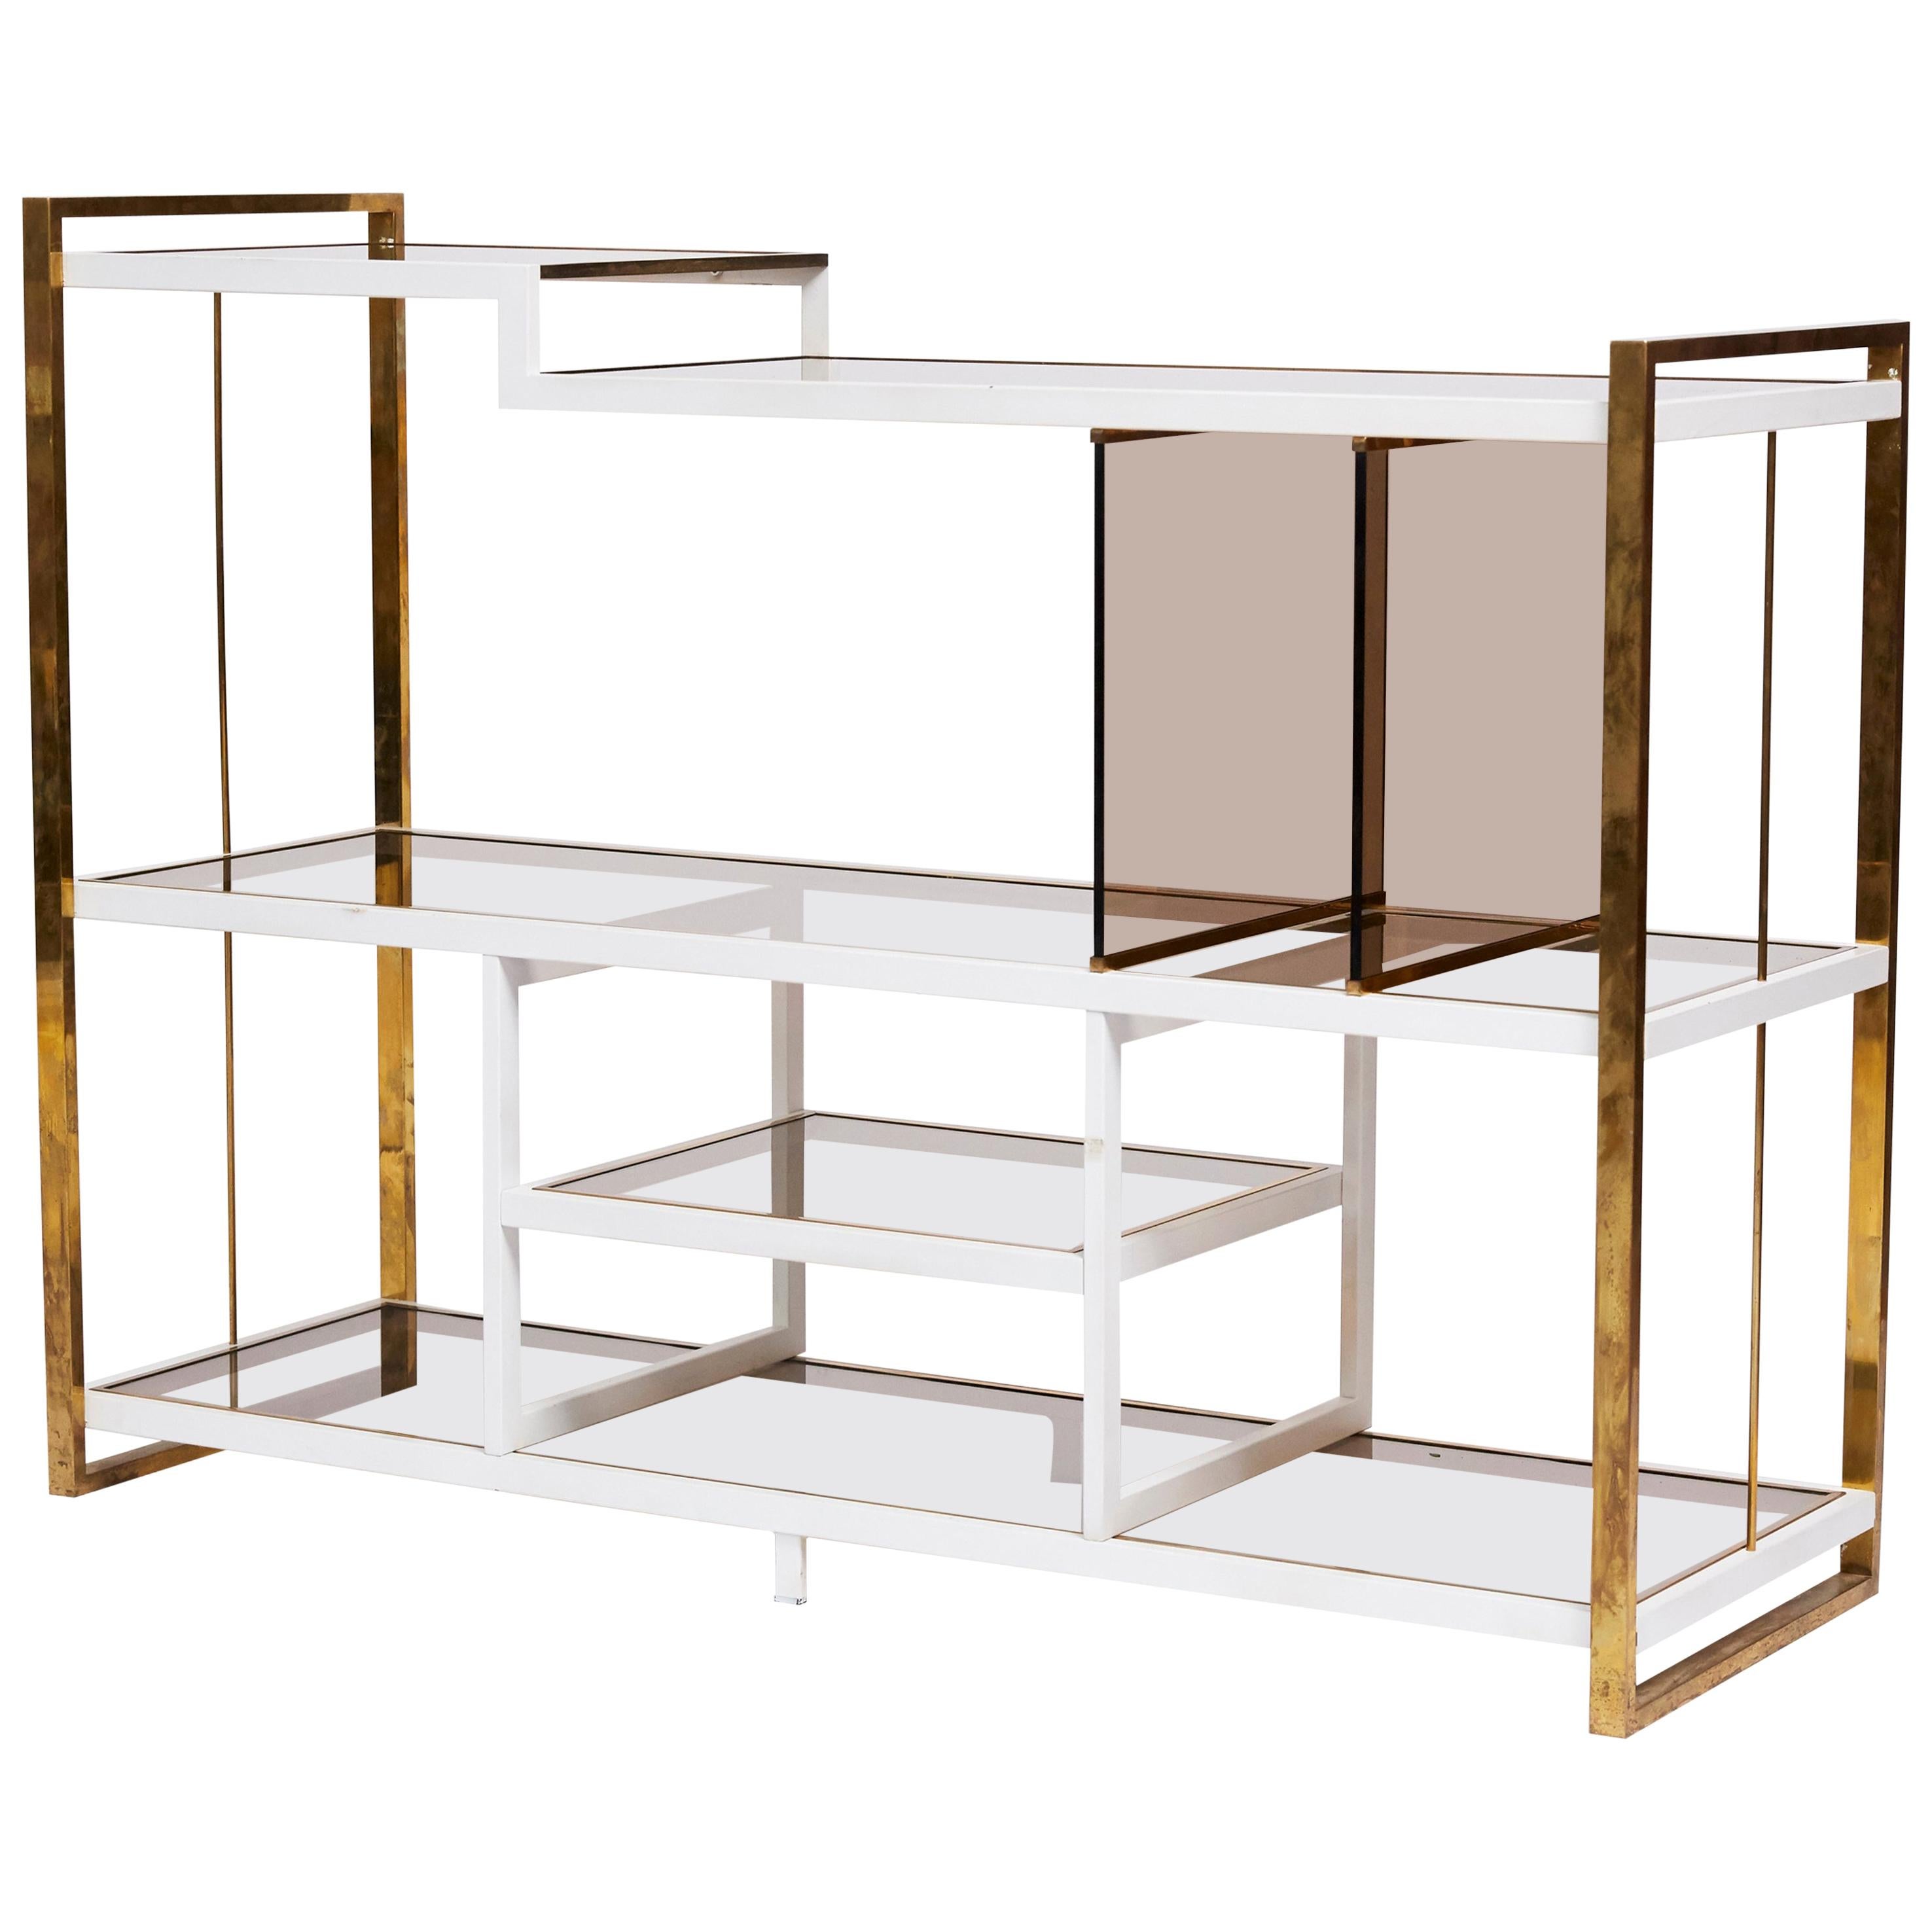 1970s Italian Brass Console in White Enamel and Smoked Glass